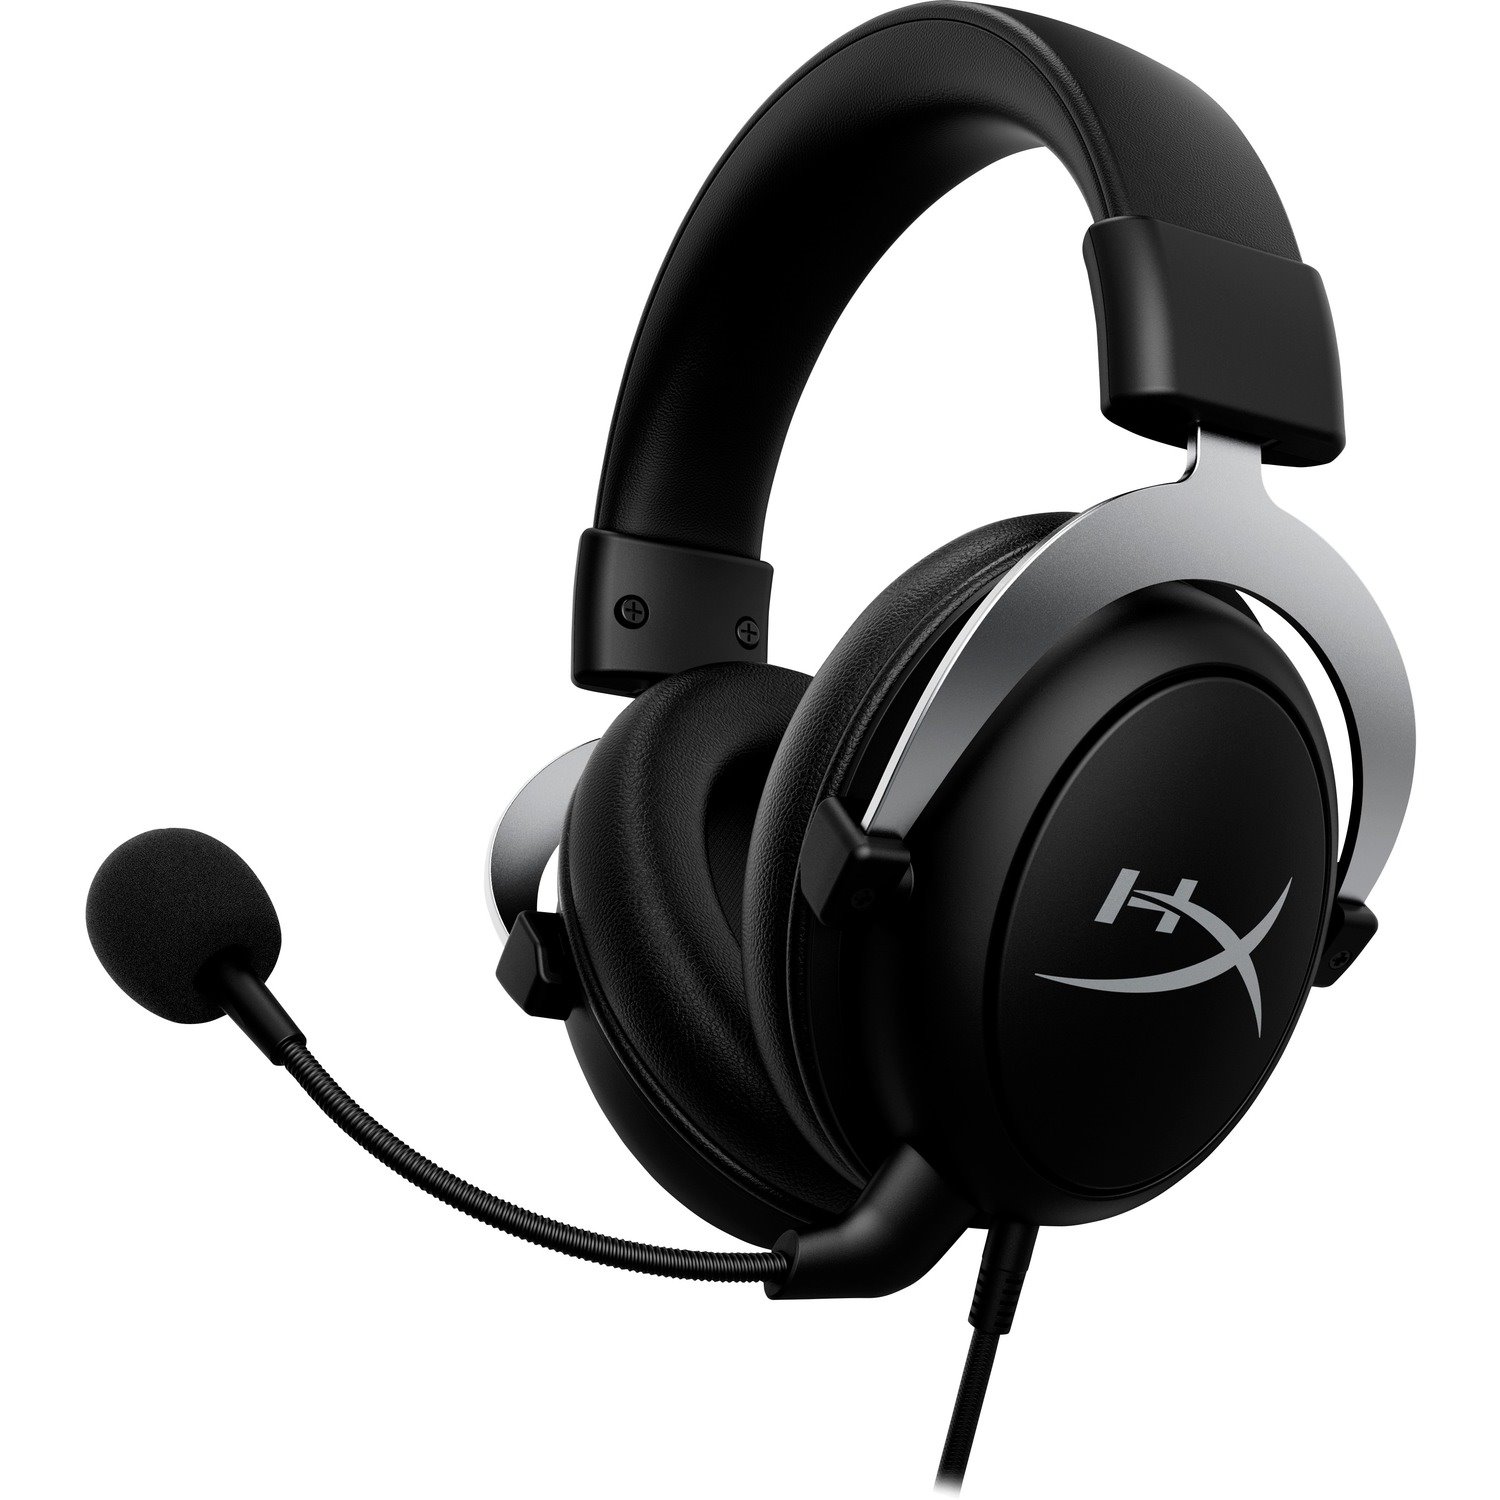 HyperX CloudX Wired Over-the-head Stereo Gaming Headset - Black/Silver